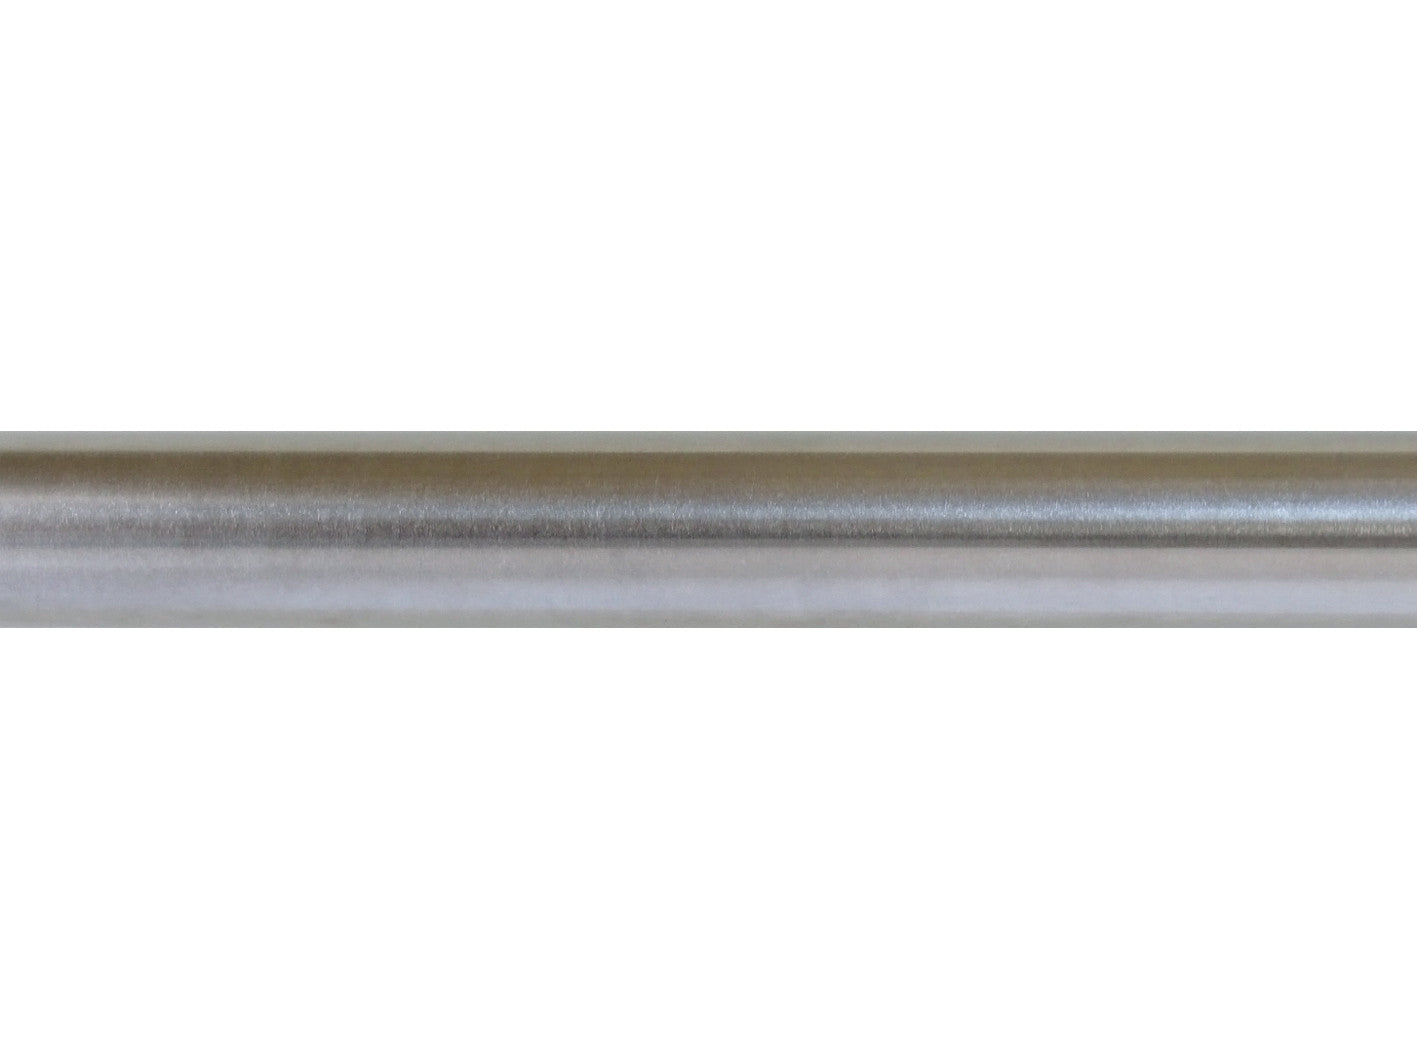 50mm stainless steel curtain pole by Walcot House